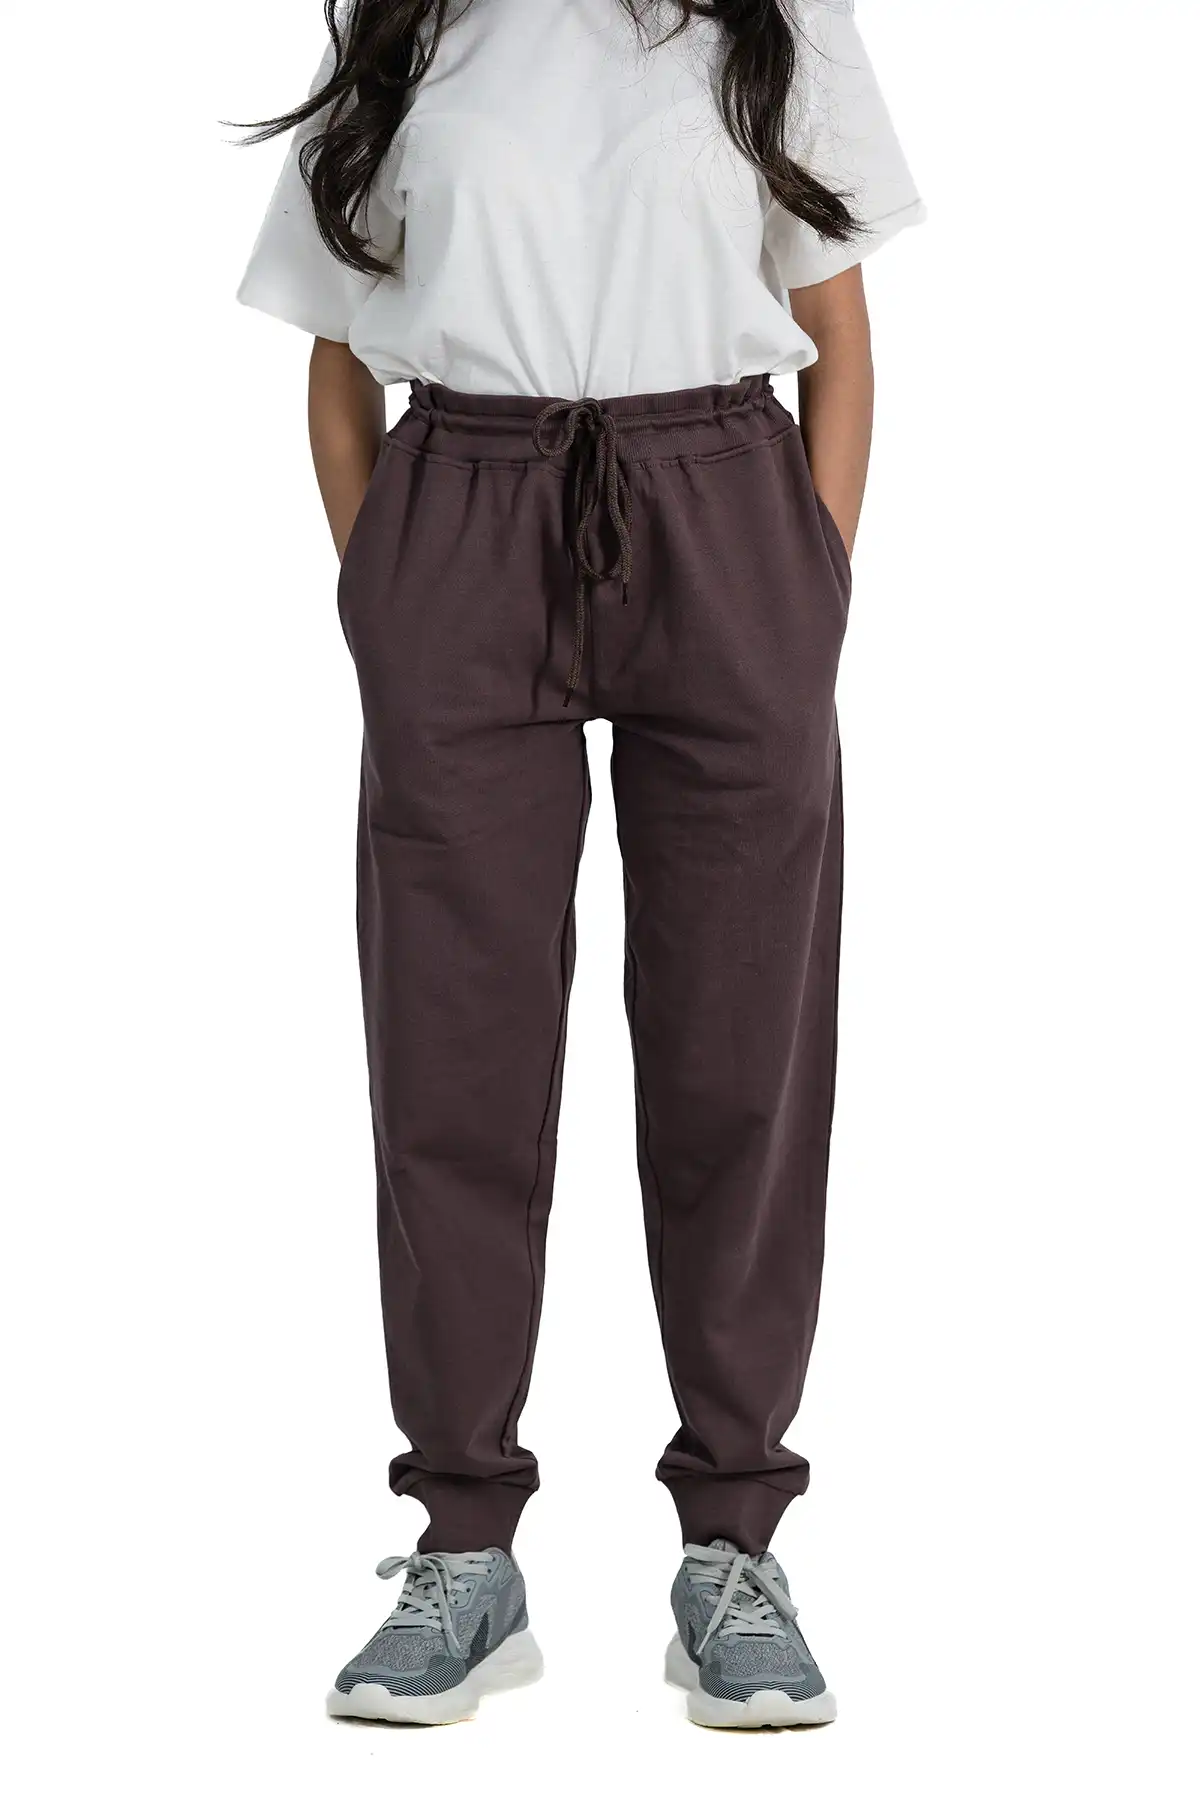 Regular Fit Unisex Joggers - Coco Brown